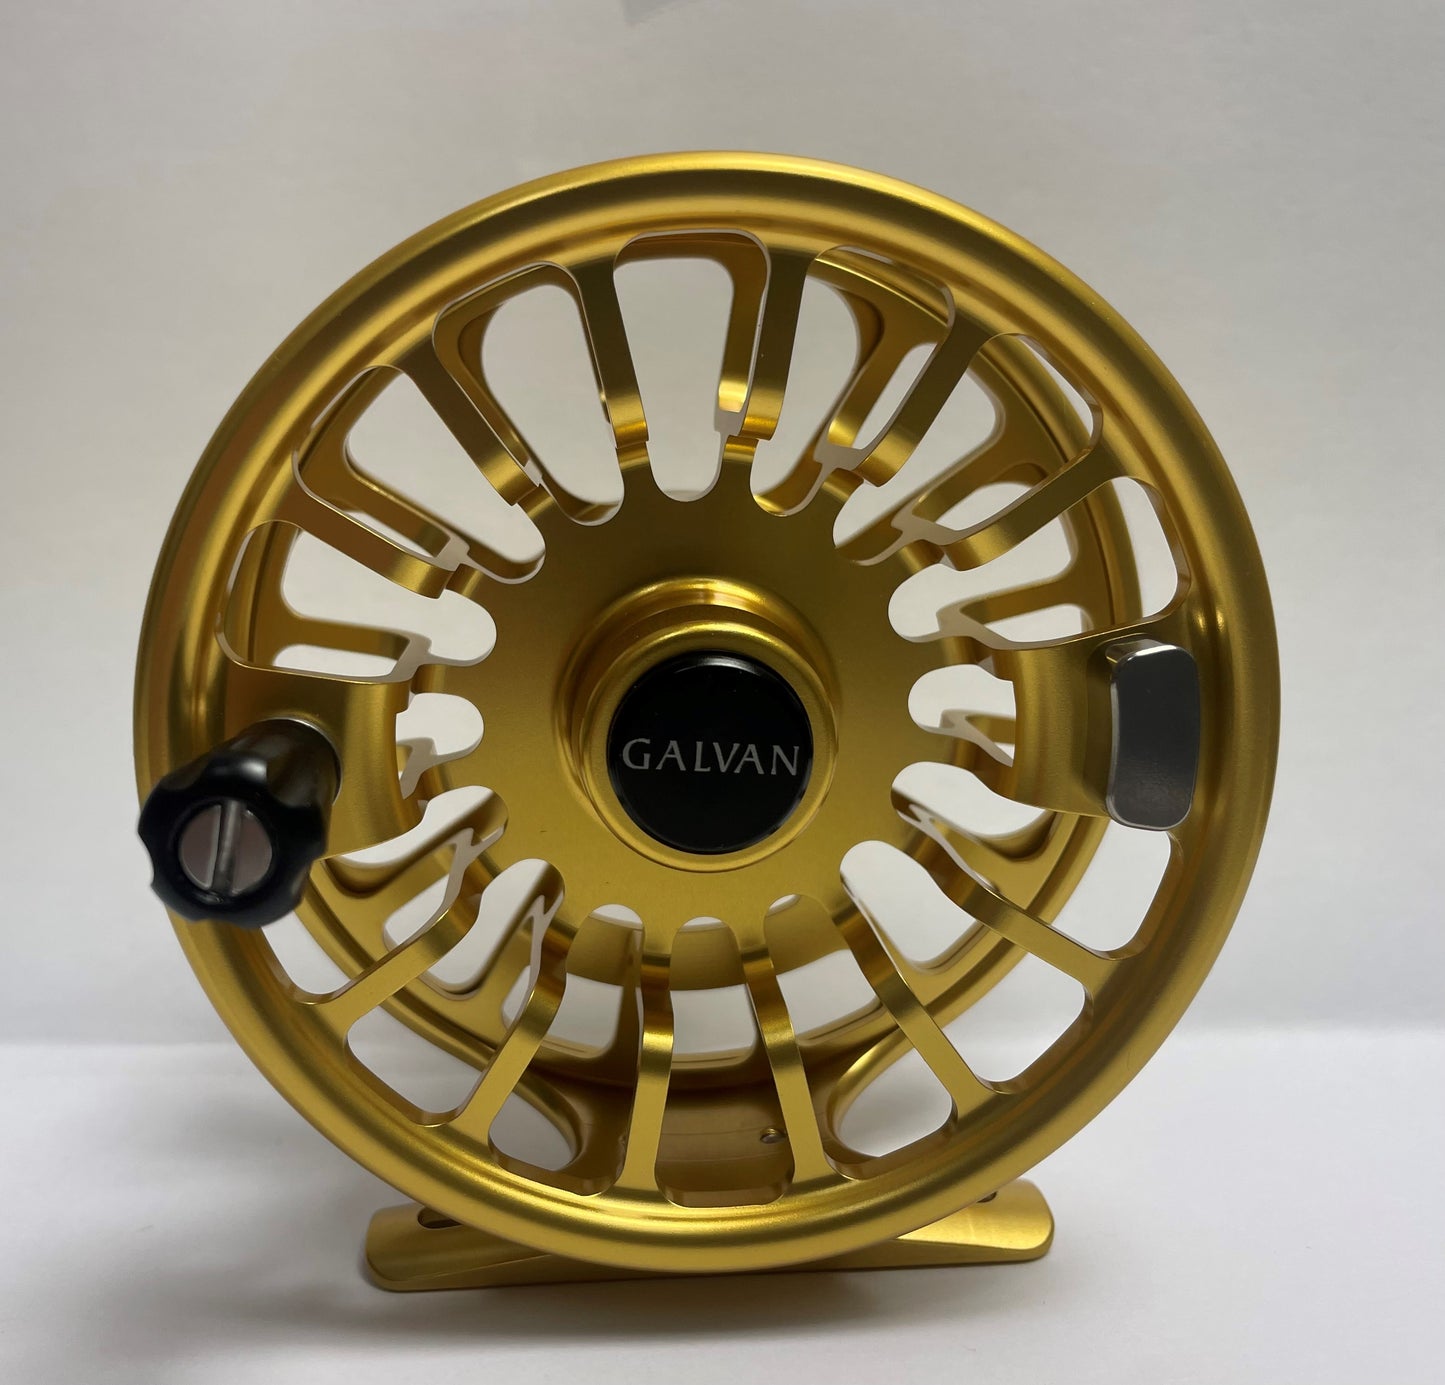 Galvan Torque Fly Reel - Limited Edition 20th Anniversary - Made in USA